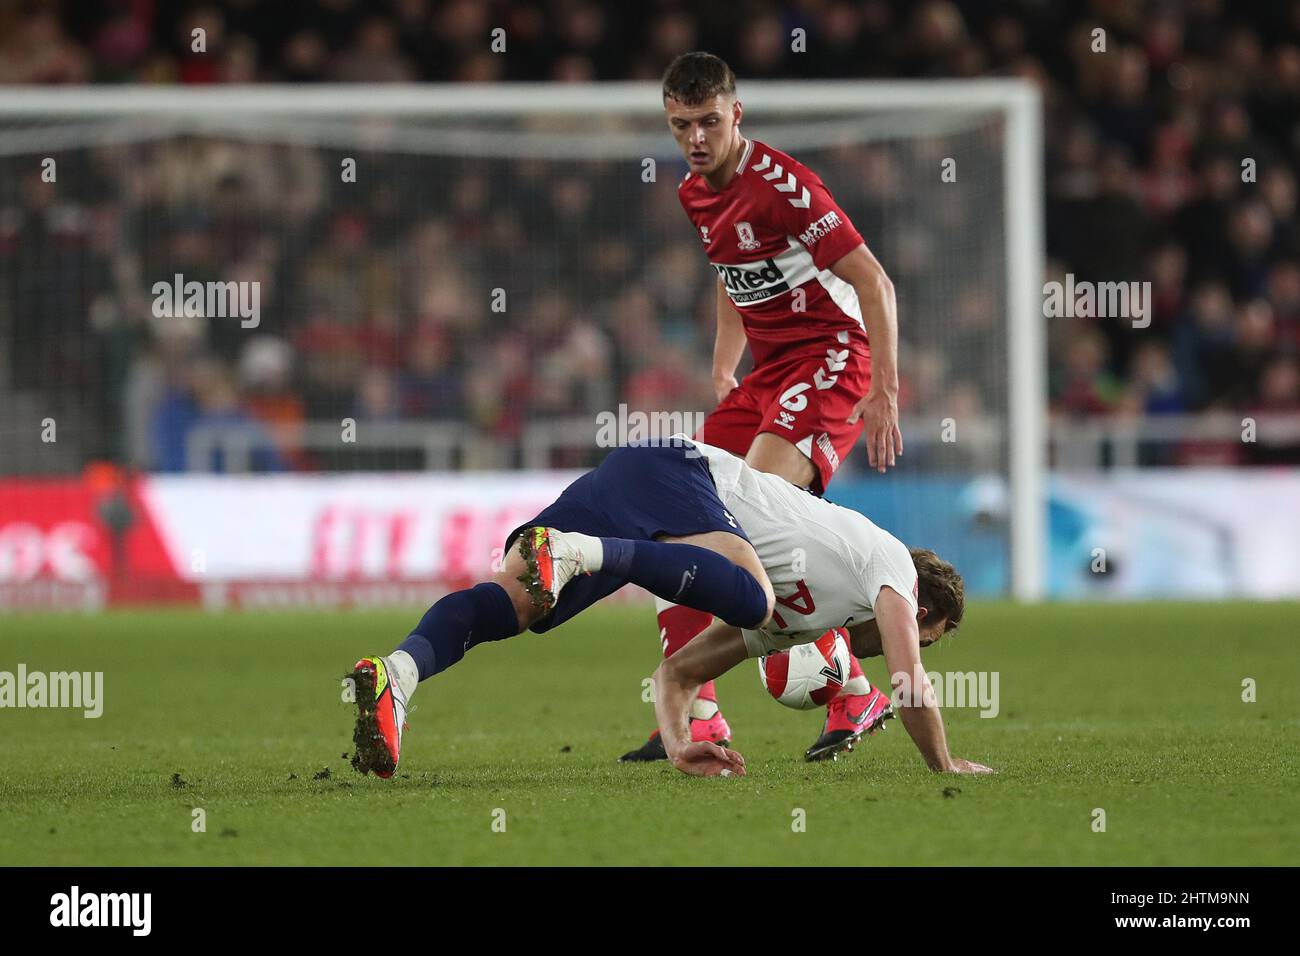 MIDDLESBROUGH, UK. MAR 1ST Tottenham Hotspur's Harry Kane falls over in front of Middlesbrough's Dael Fry during the FA Cup Fifth Round match between Middlesbrough and Tottenham Hotspur at the Riverside Stadium, Middlesbrough on Tuesday 1st March 2022. (Credit: Mark Fletcher | MI News) Credit: MI News & Sport /Alamy Live News Stock Photo